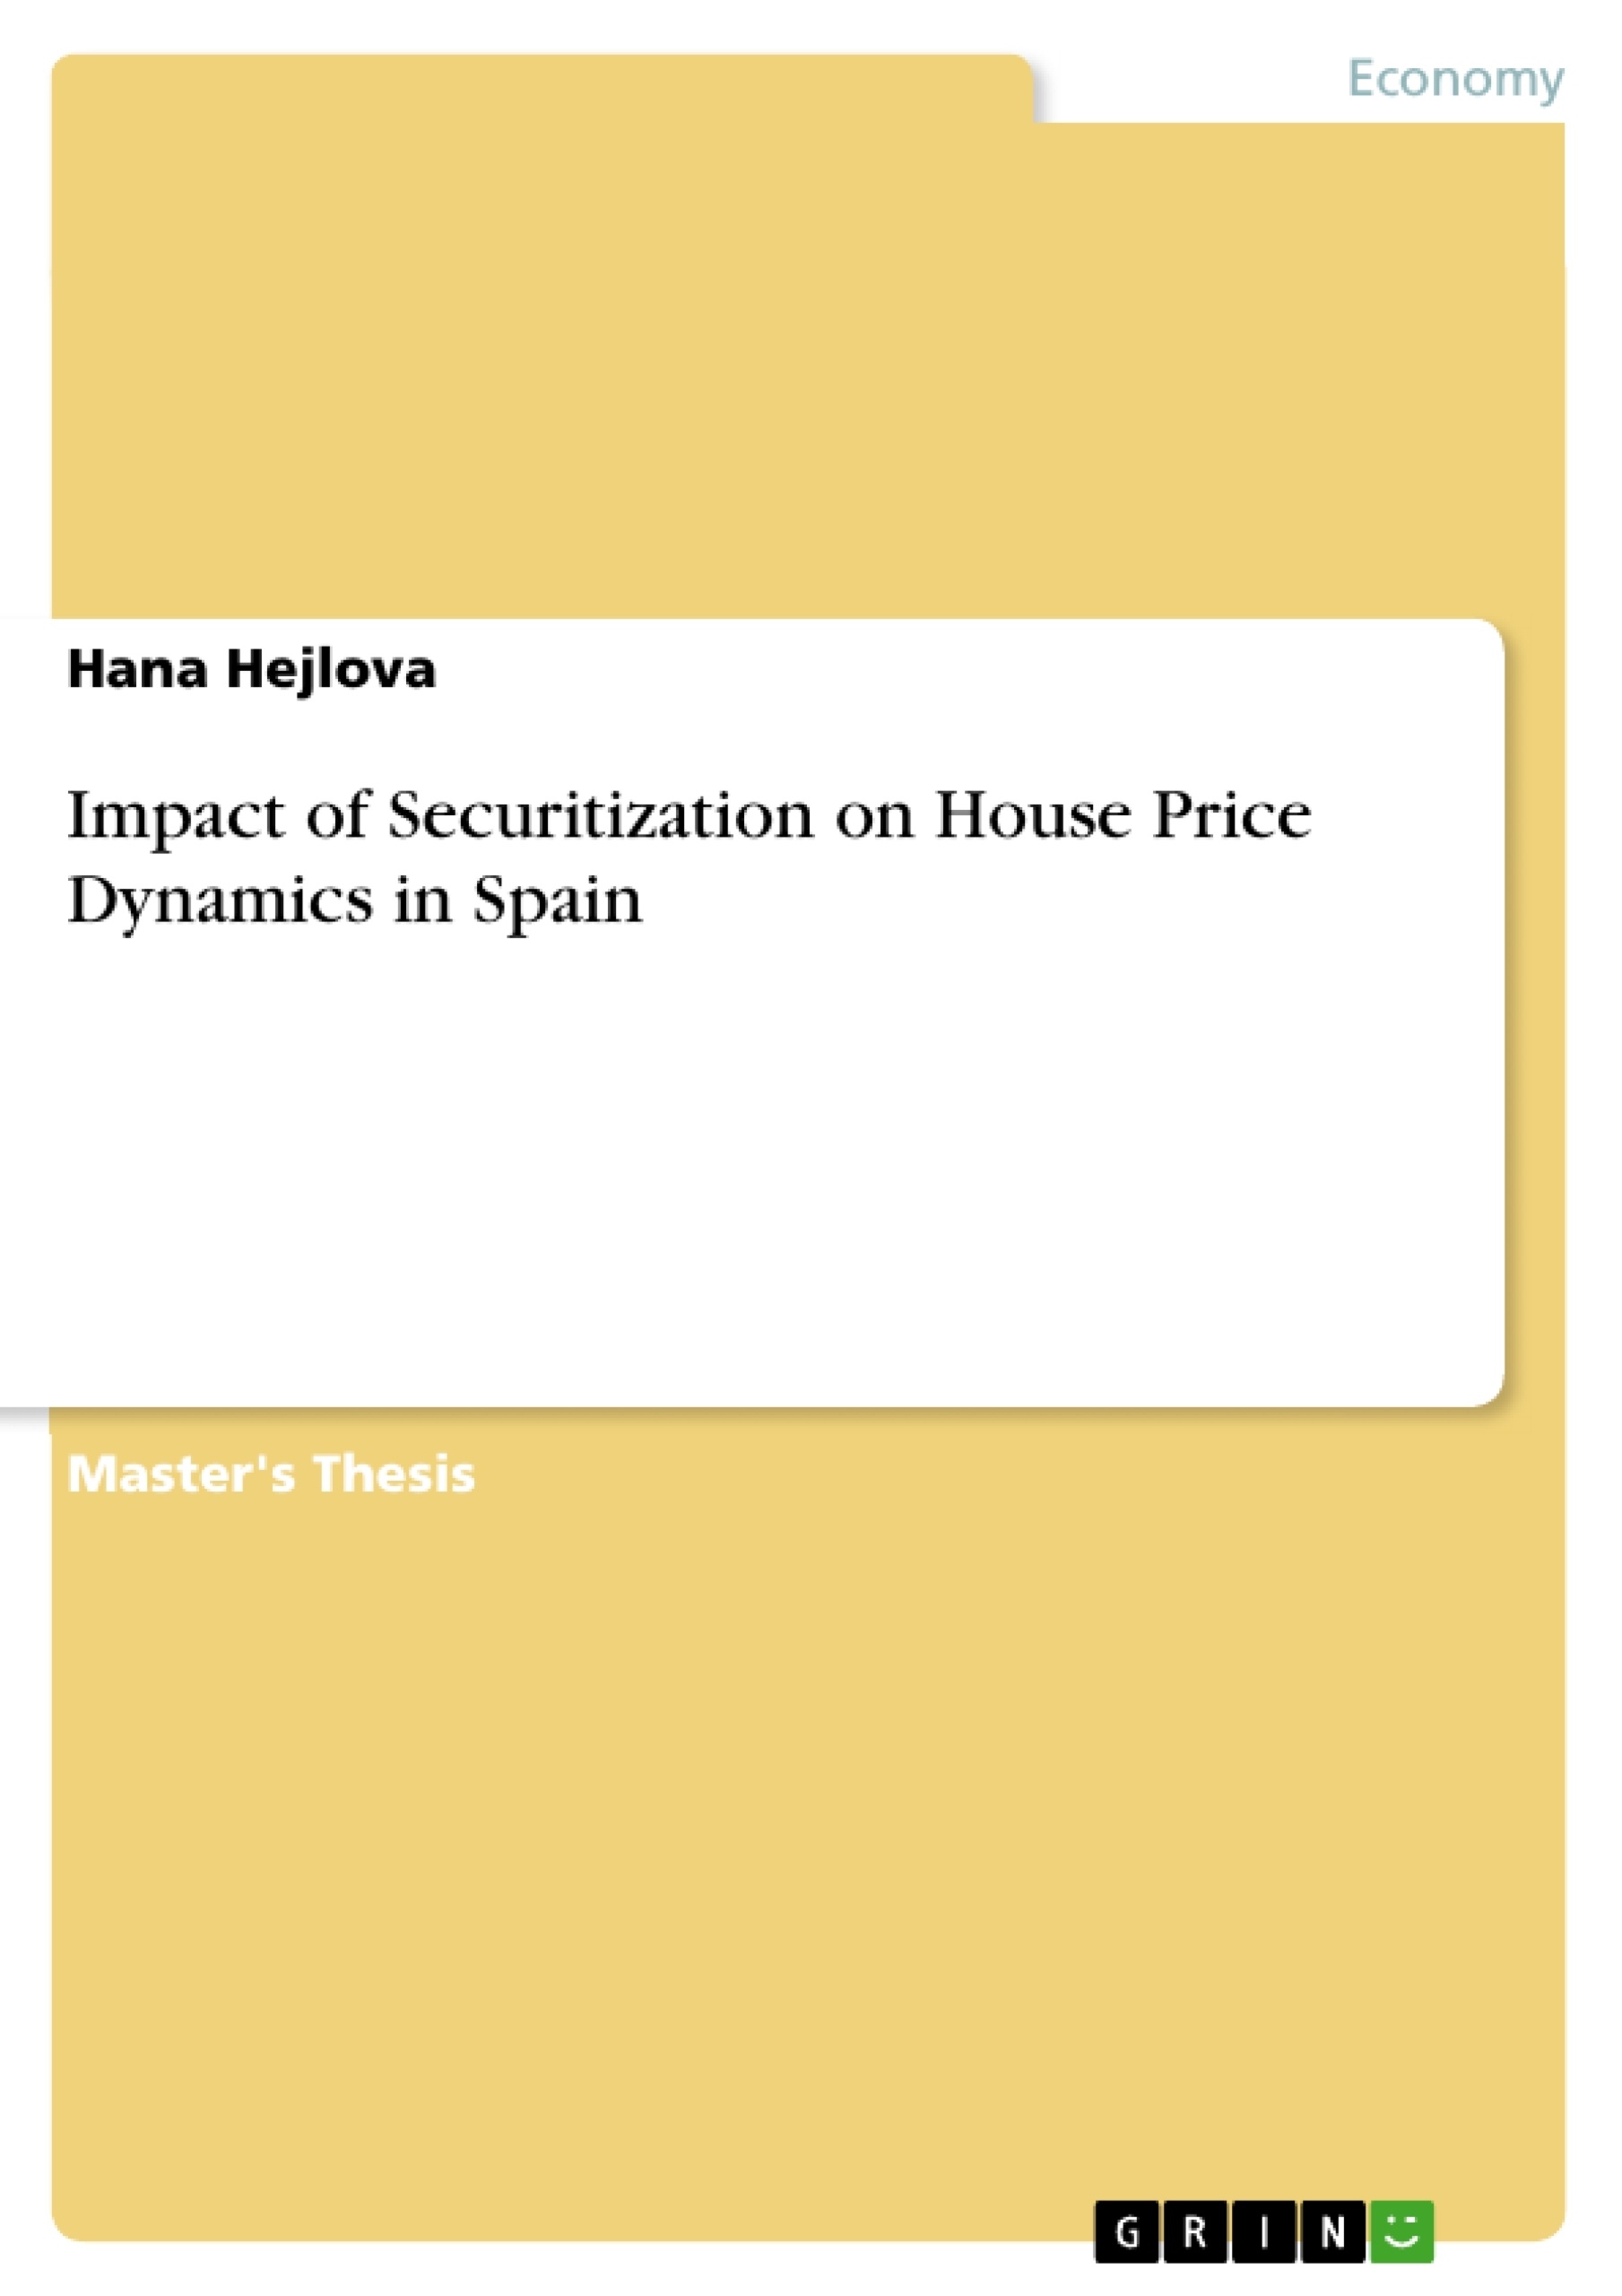 Titre: Impact of Securitization on House Price Dynamics in Spain